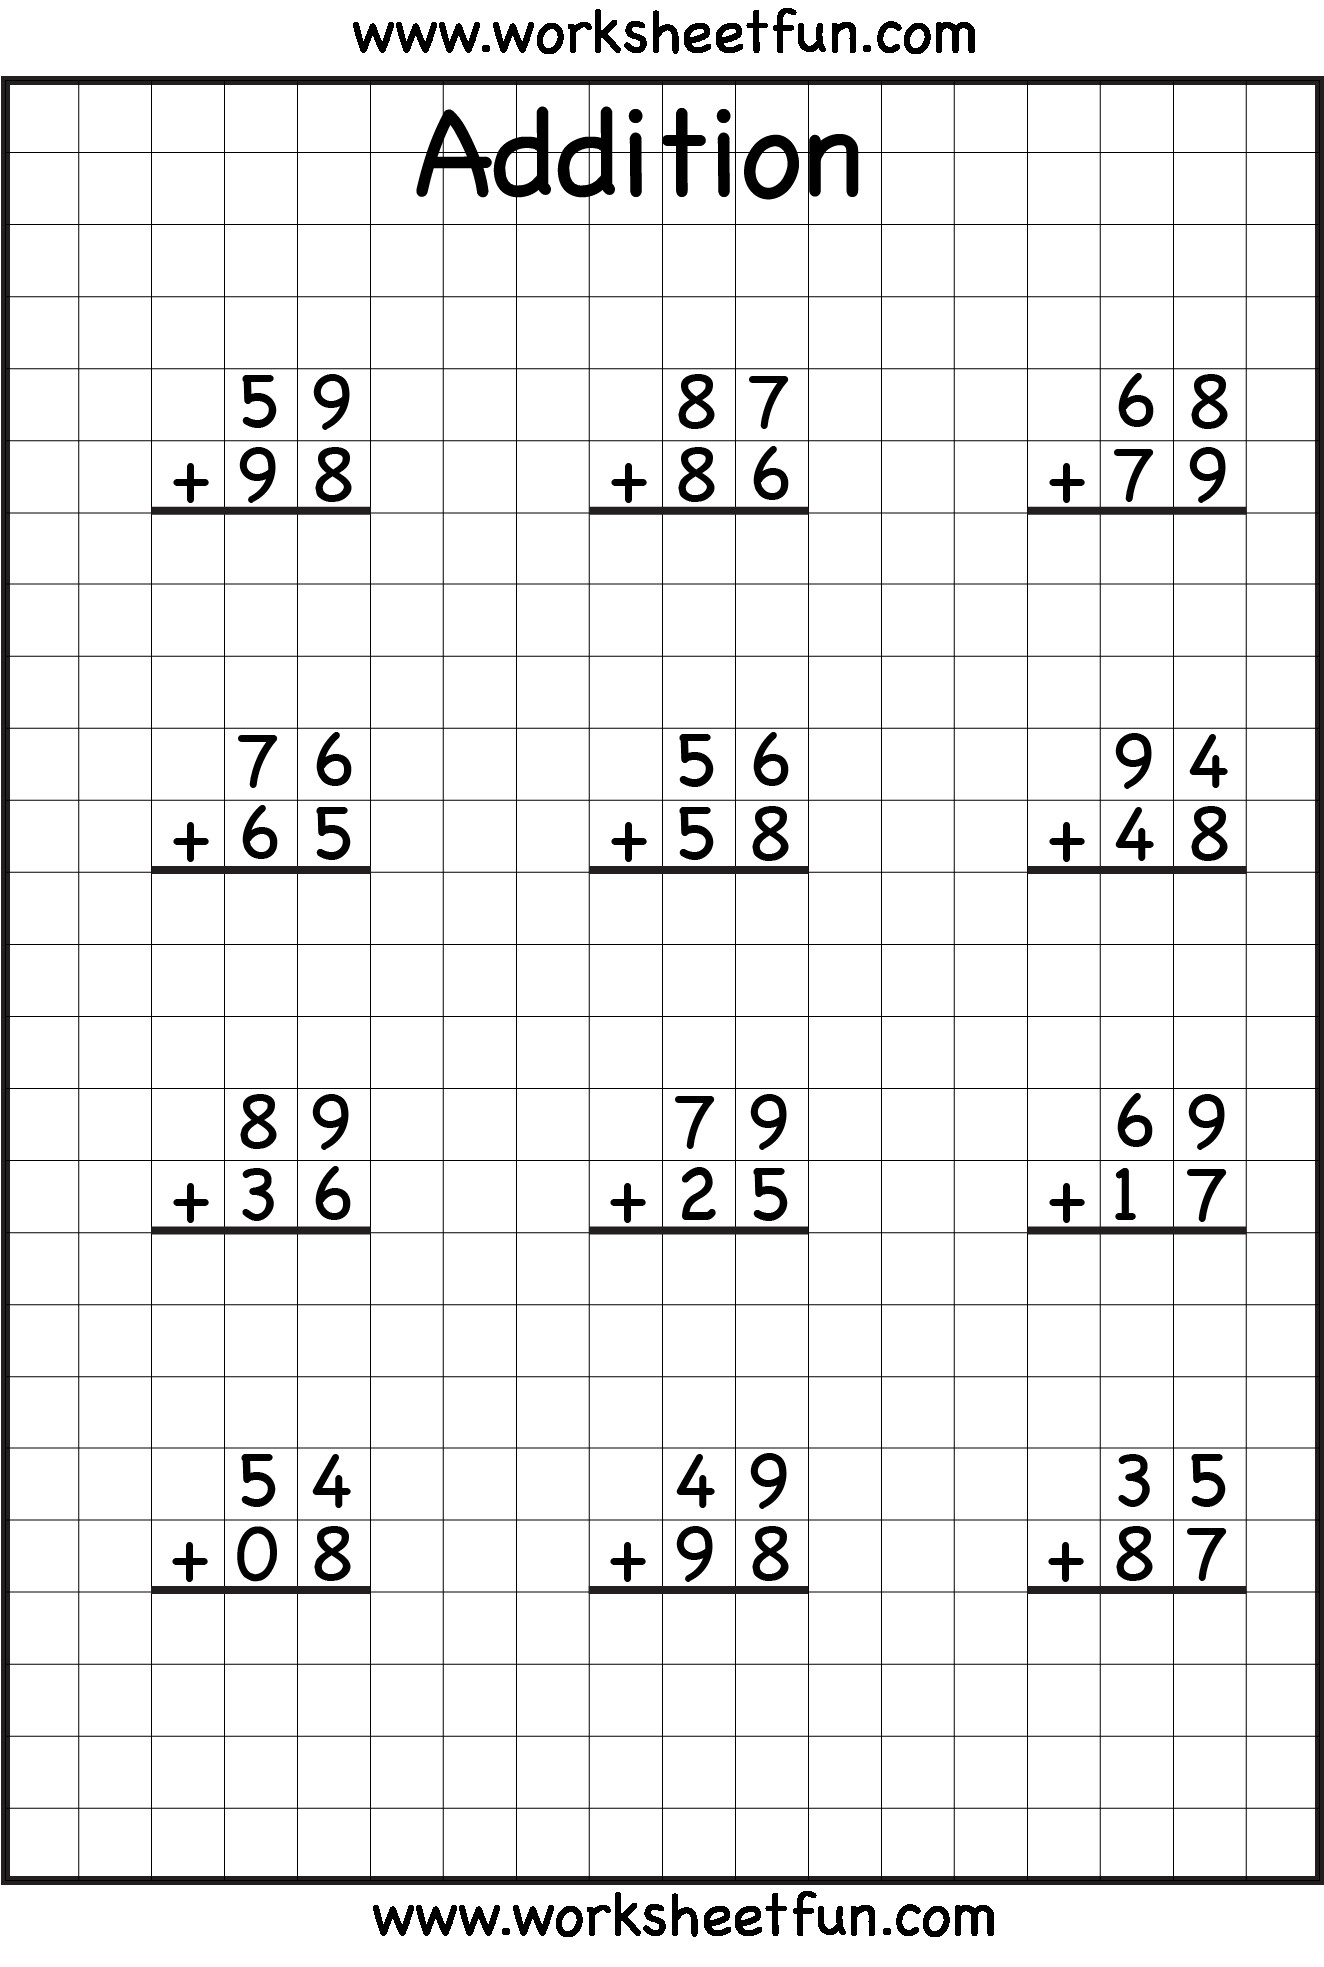 5 Free Math Worksheets Third Grade 3 Addition Add 3 3 Digit Numbers In Columns